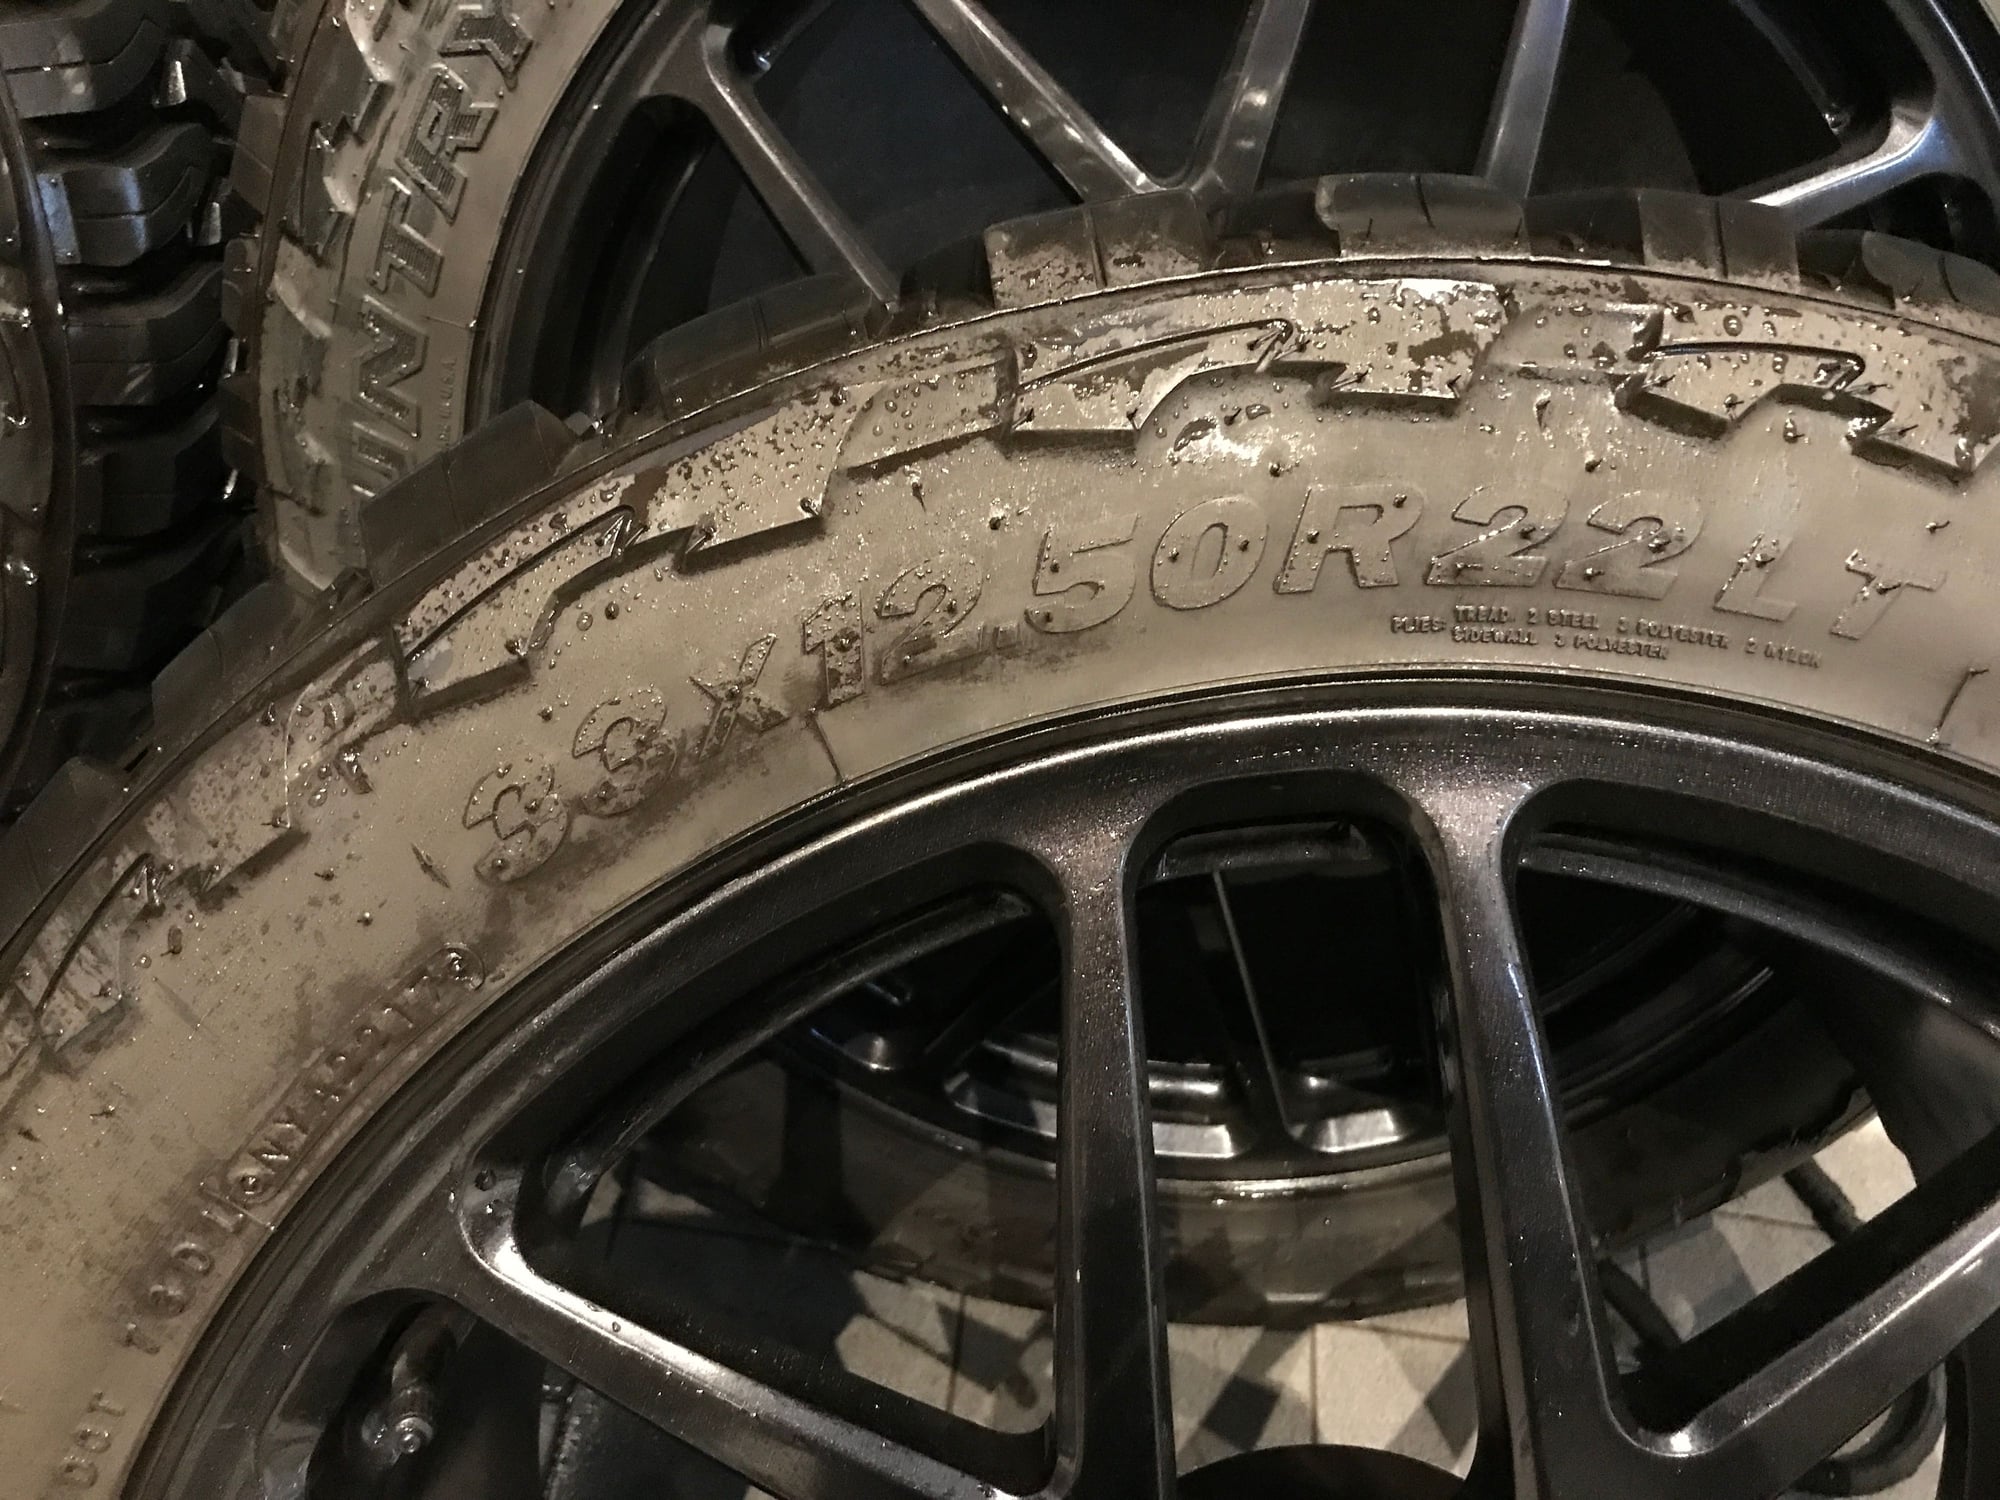 Wheels and Tires/Axles - Mercedes G-Class HRE Wheel Set / Toyo Open Country - Used - 2003 to 2018 Mercedes-Benz G63 AMG - Laval, QC H7X3K0, Canada